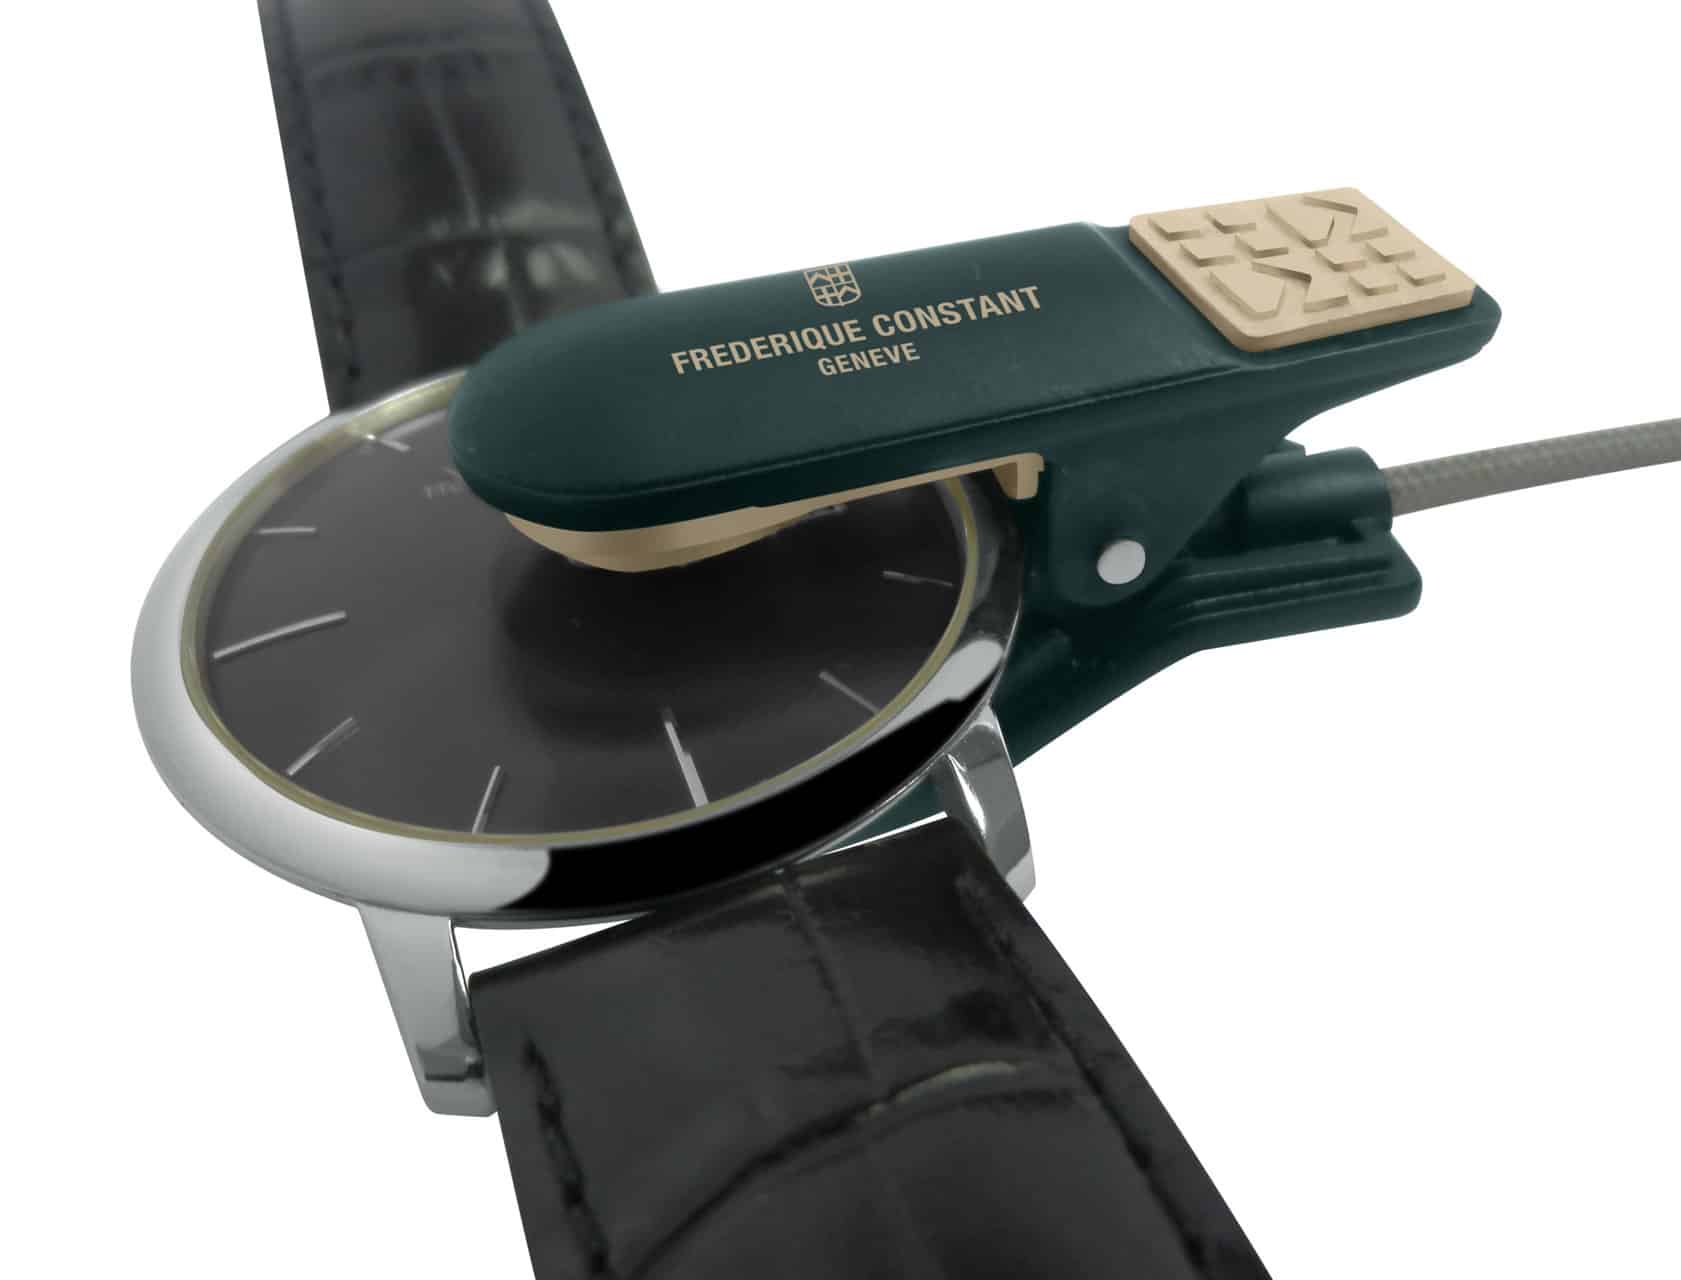 Frederique Constant launches ingenious watch accuracy measuring clip